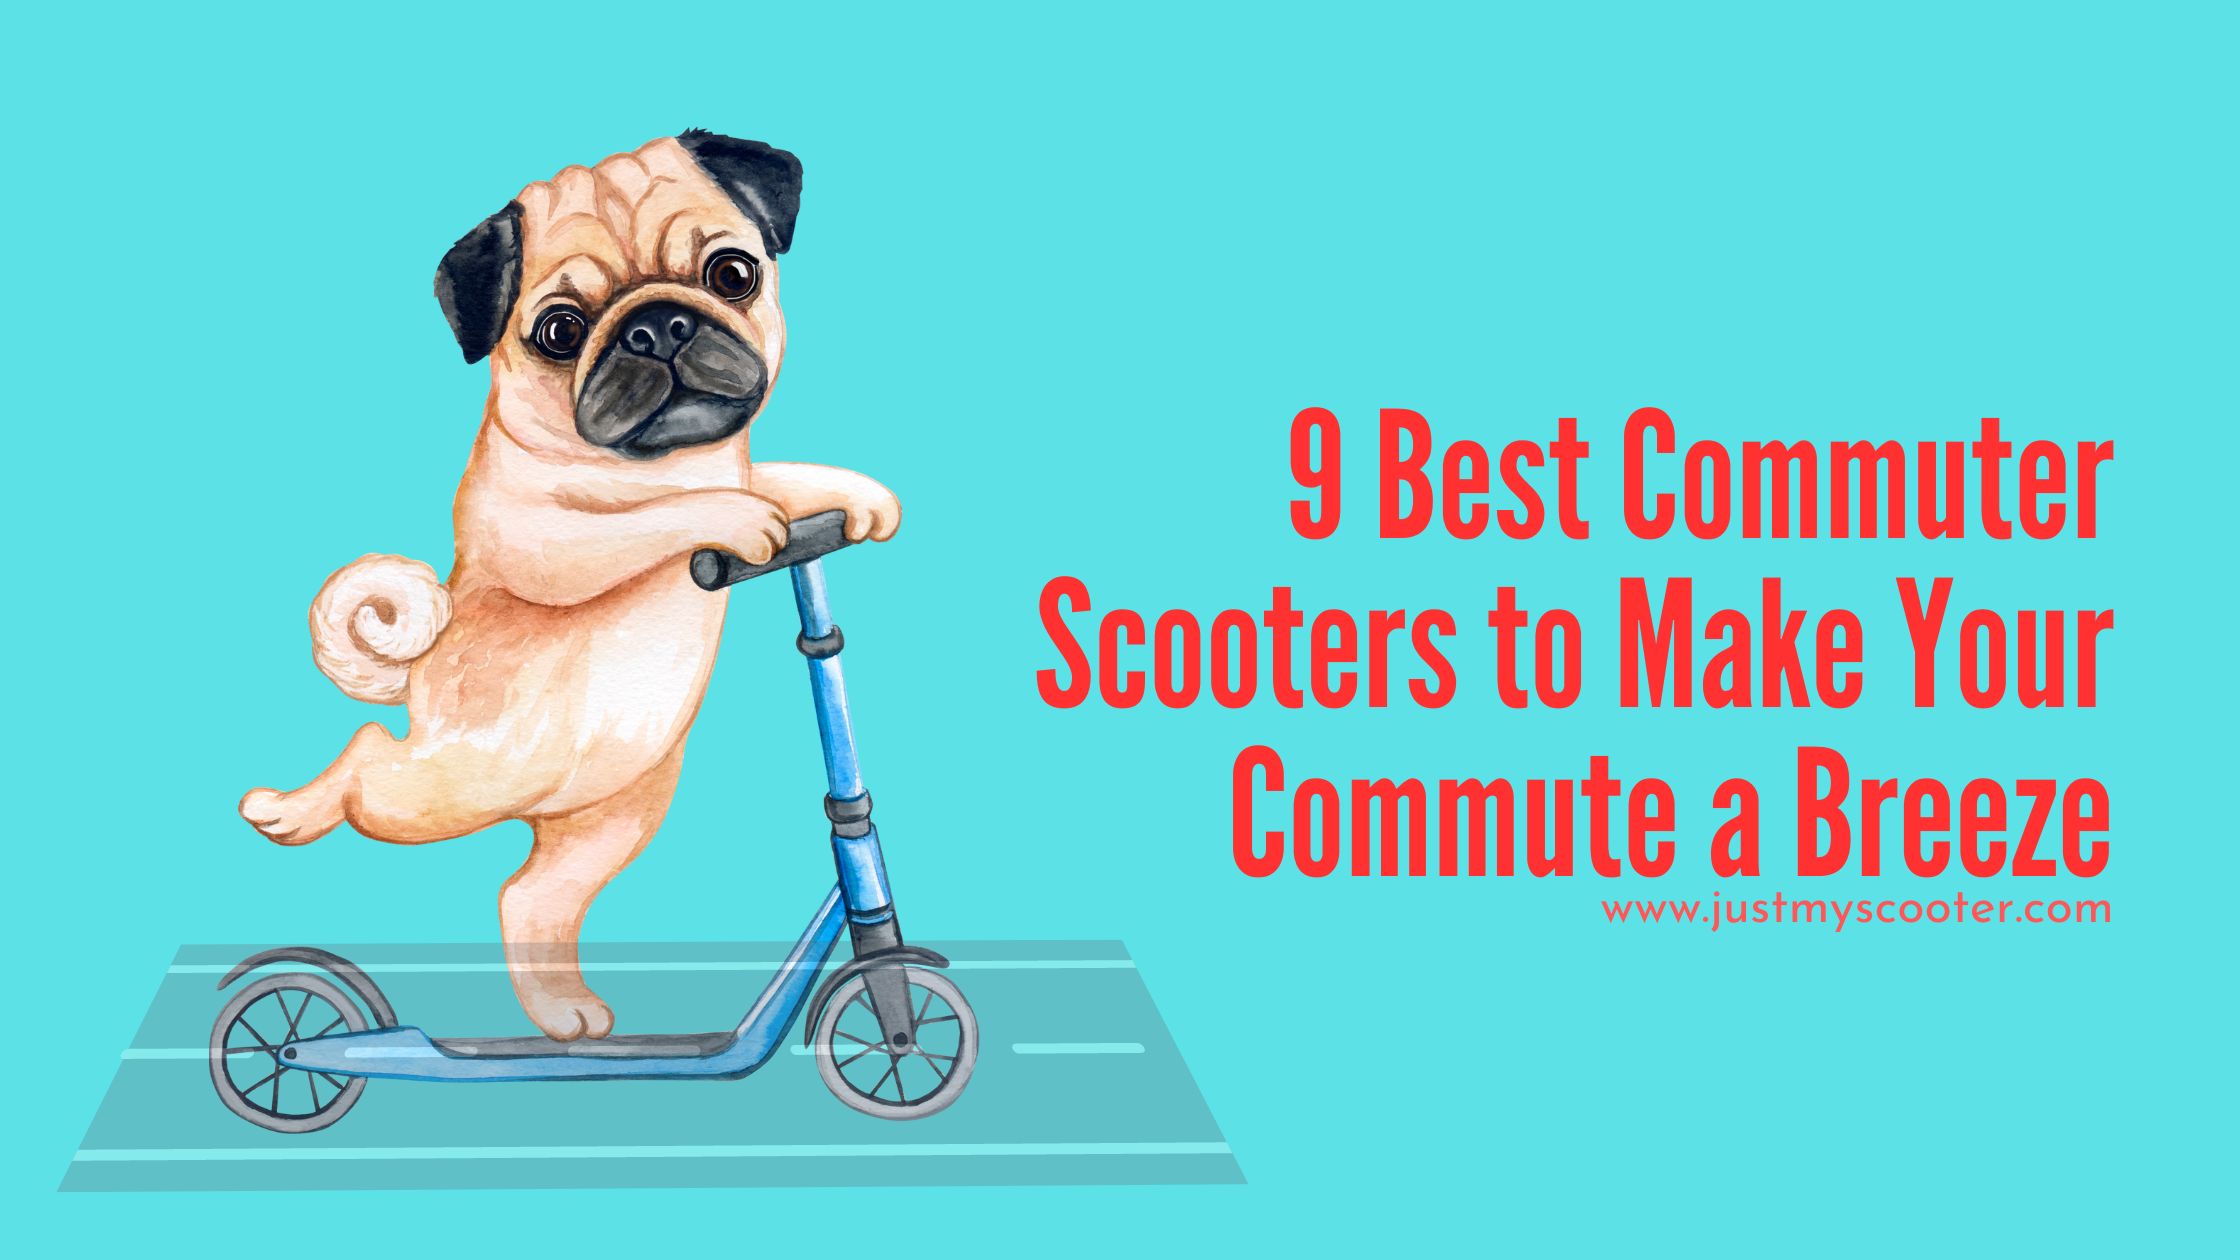 9 Best Commuter Scooters to Make Your Commute a Breeze